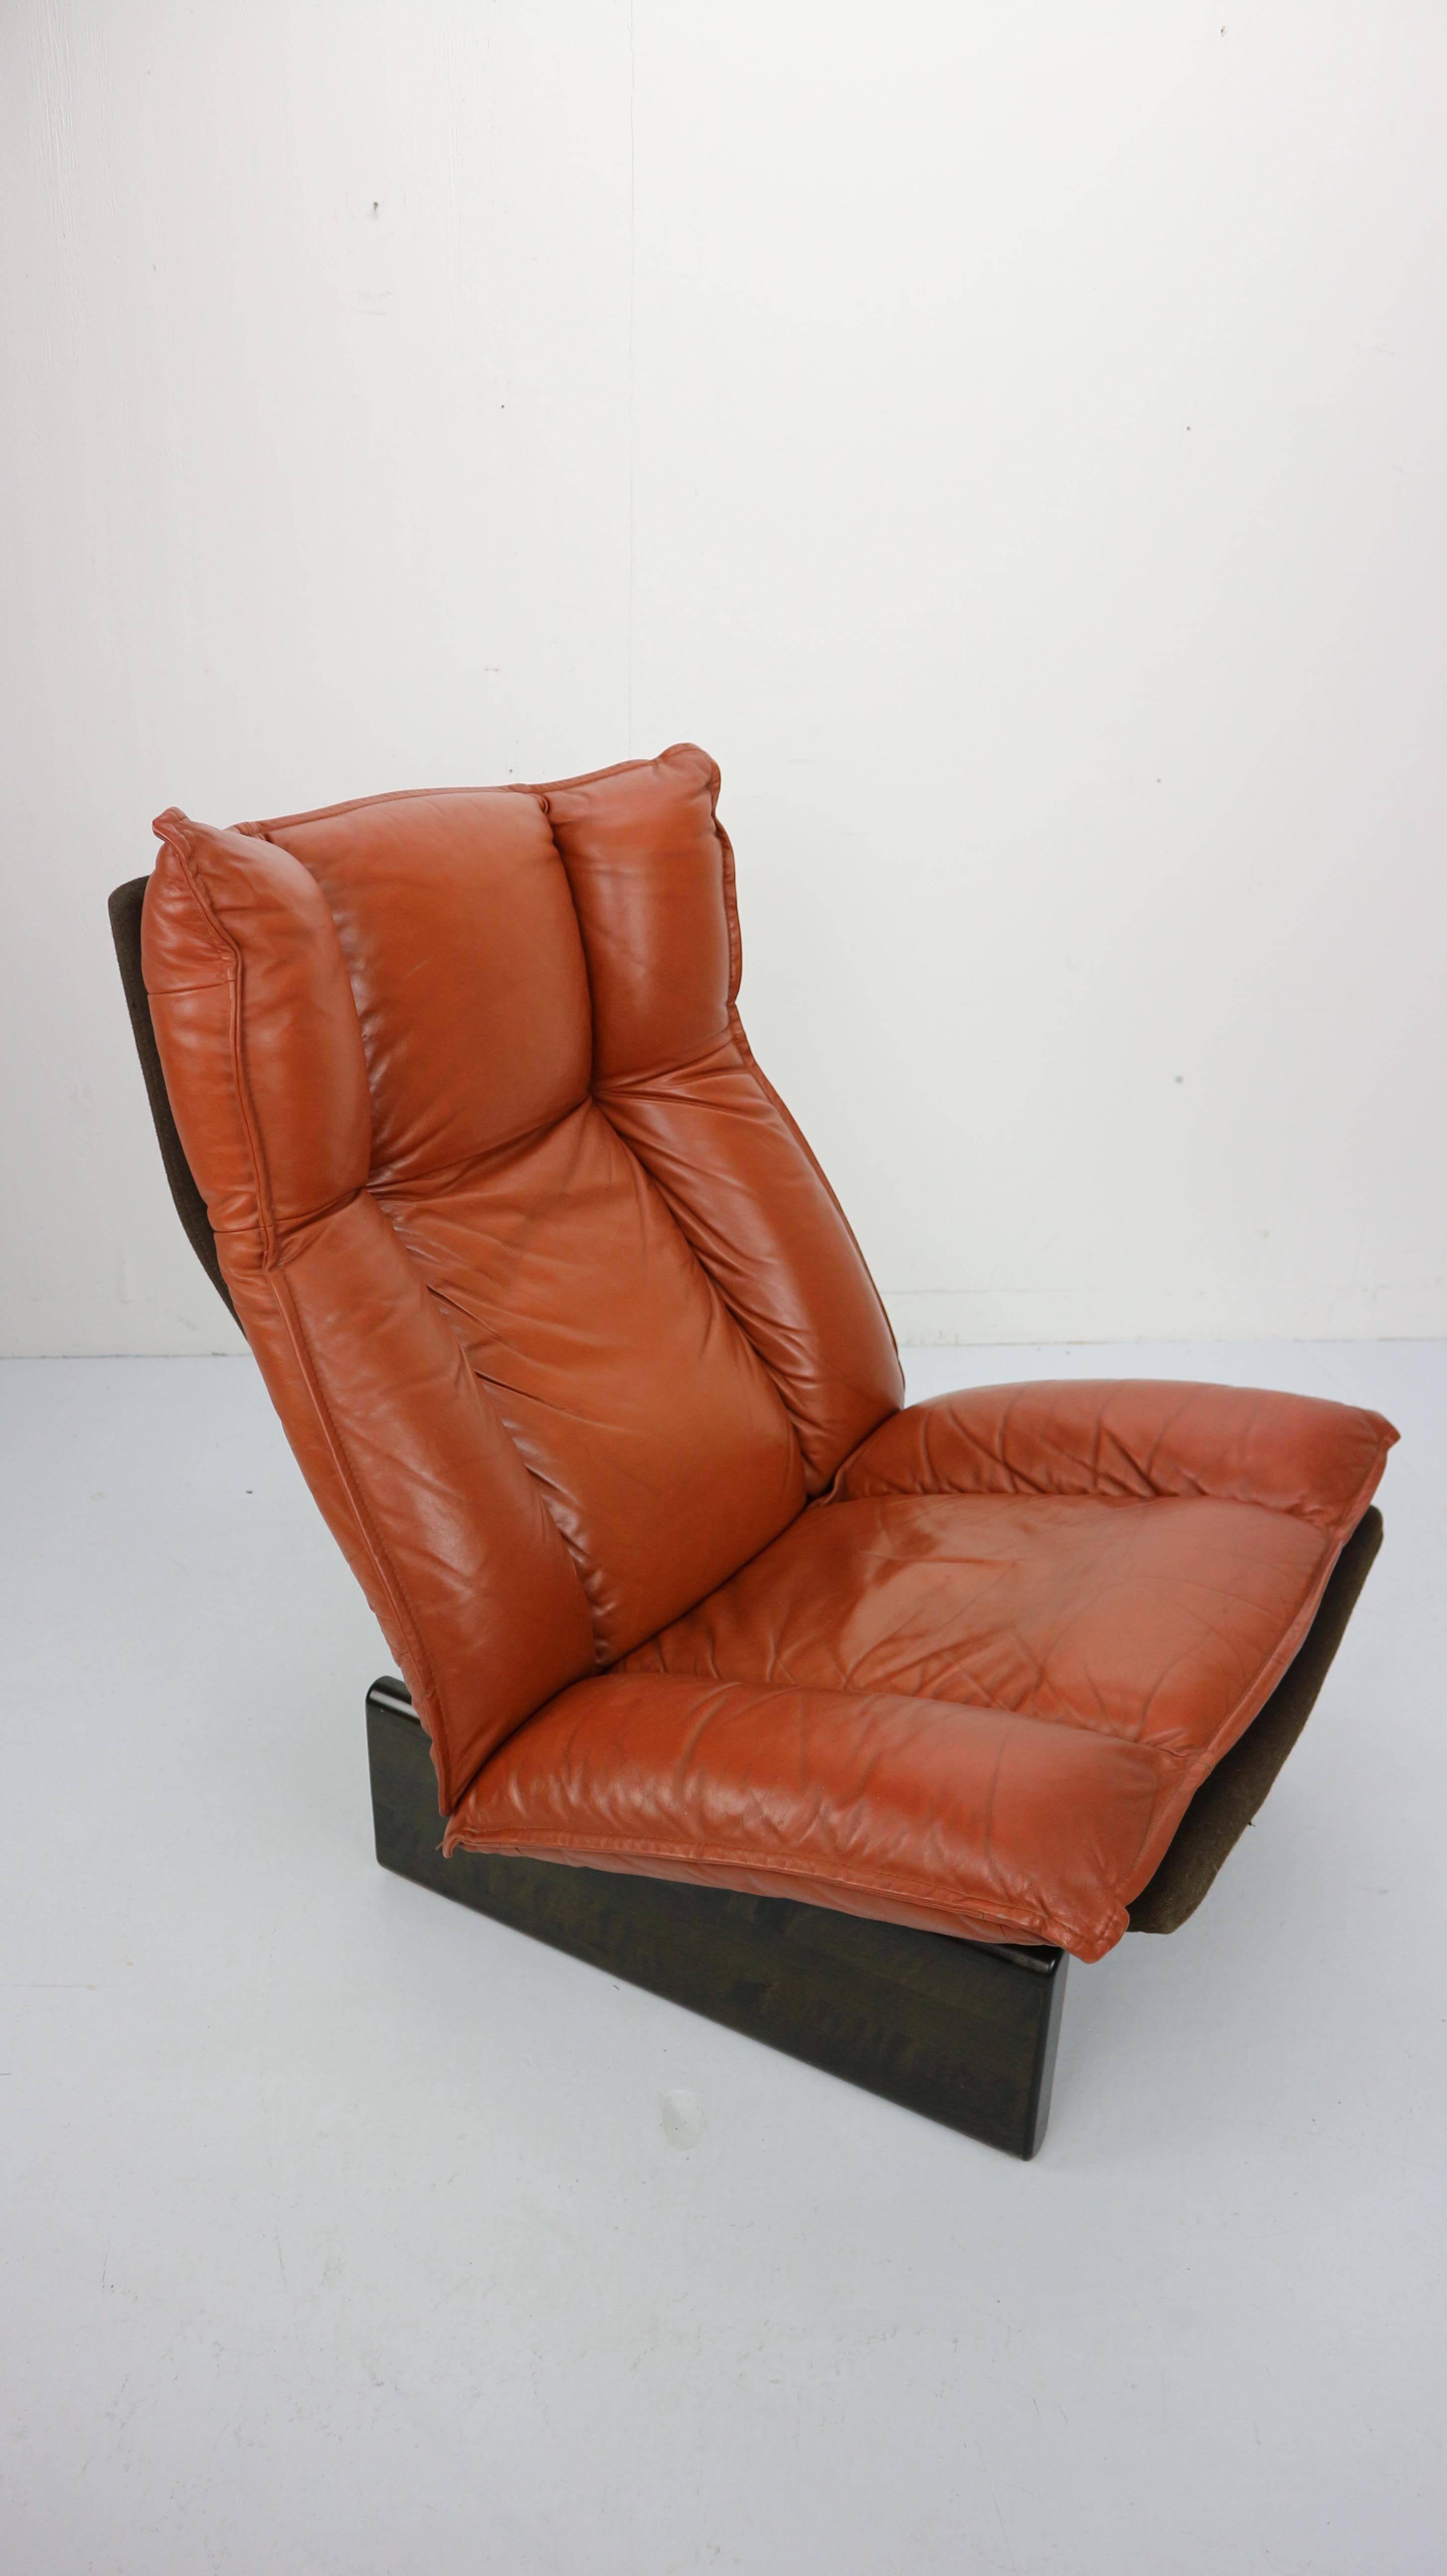 Mid-Century Modern Cognac Leather and Wood Lounge Chair, Dutch Modern Design, 1970s